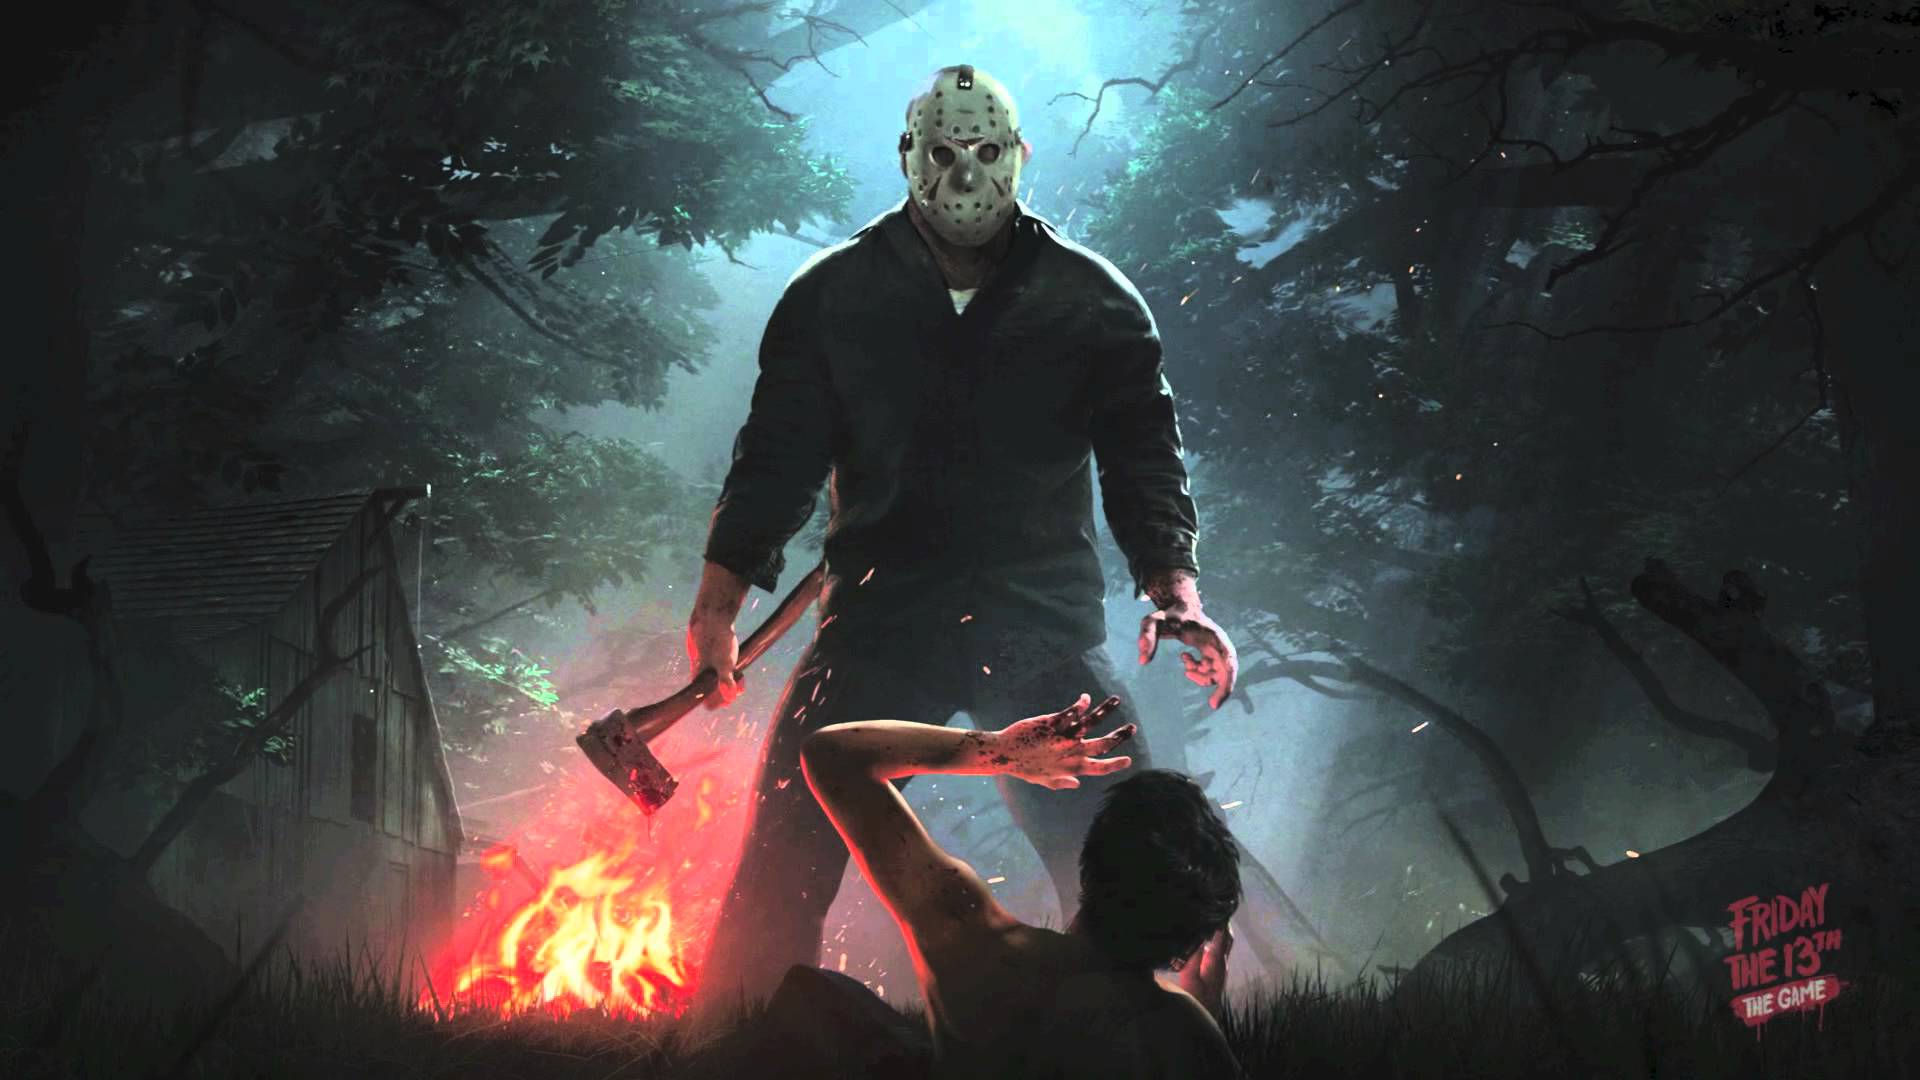 Friday the 13th: The Gane